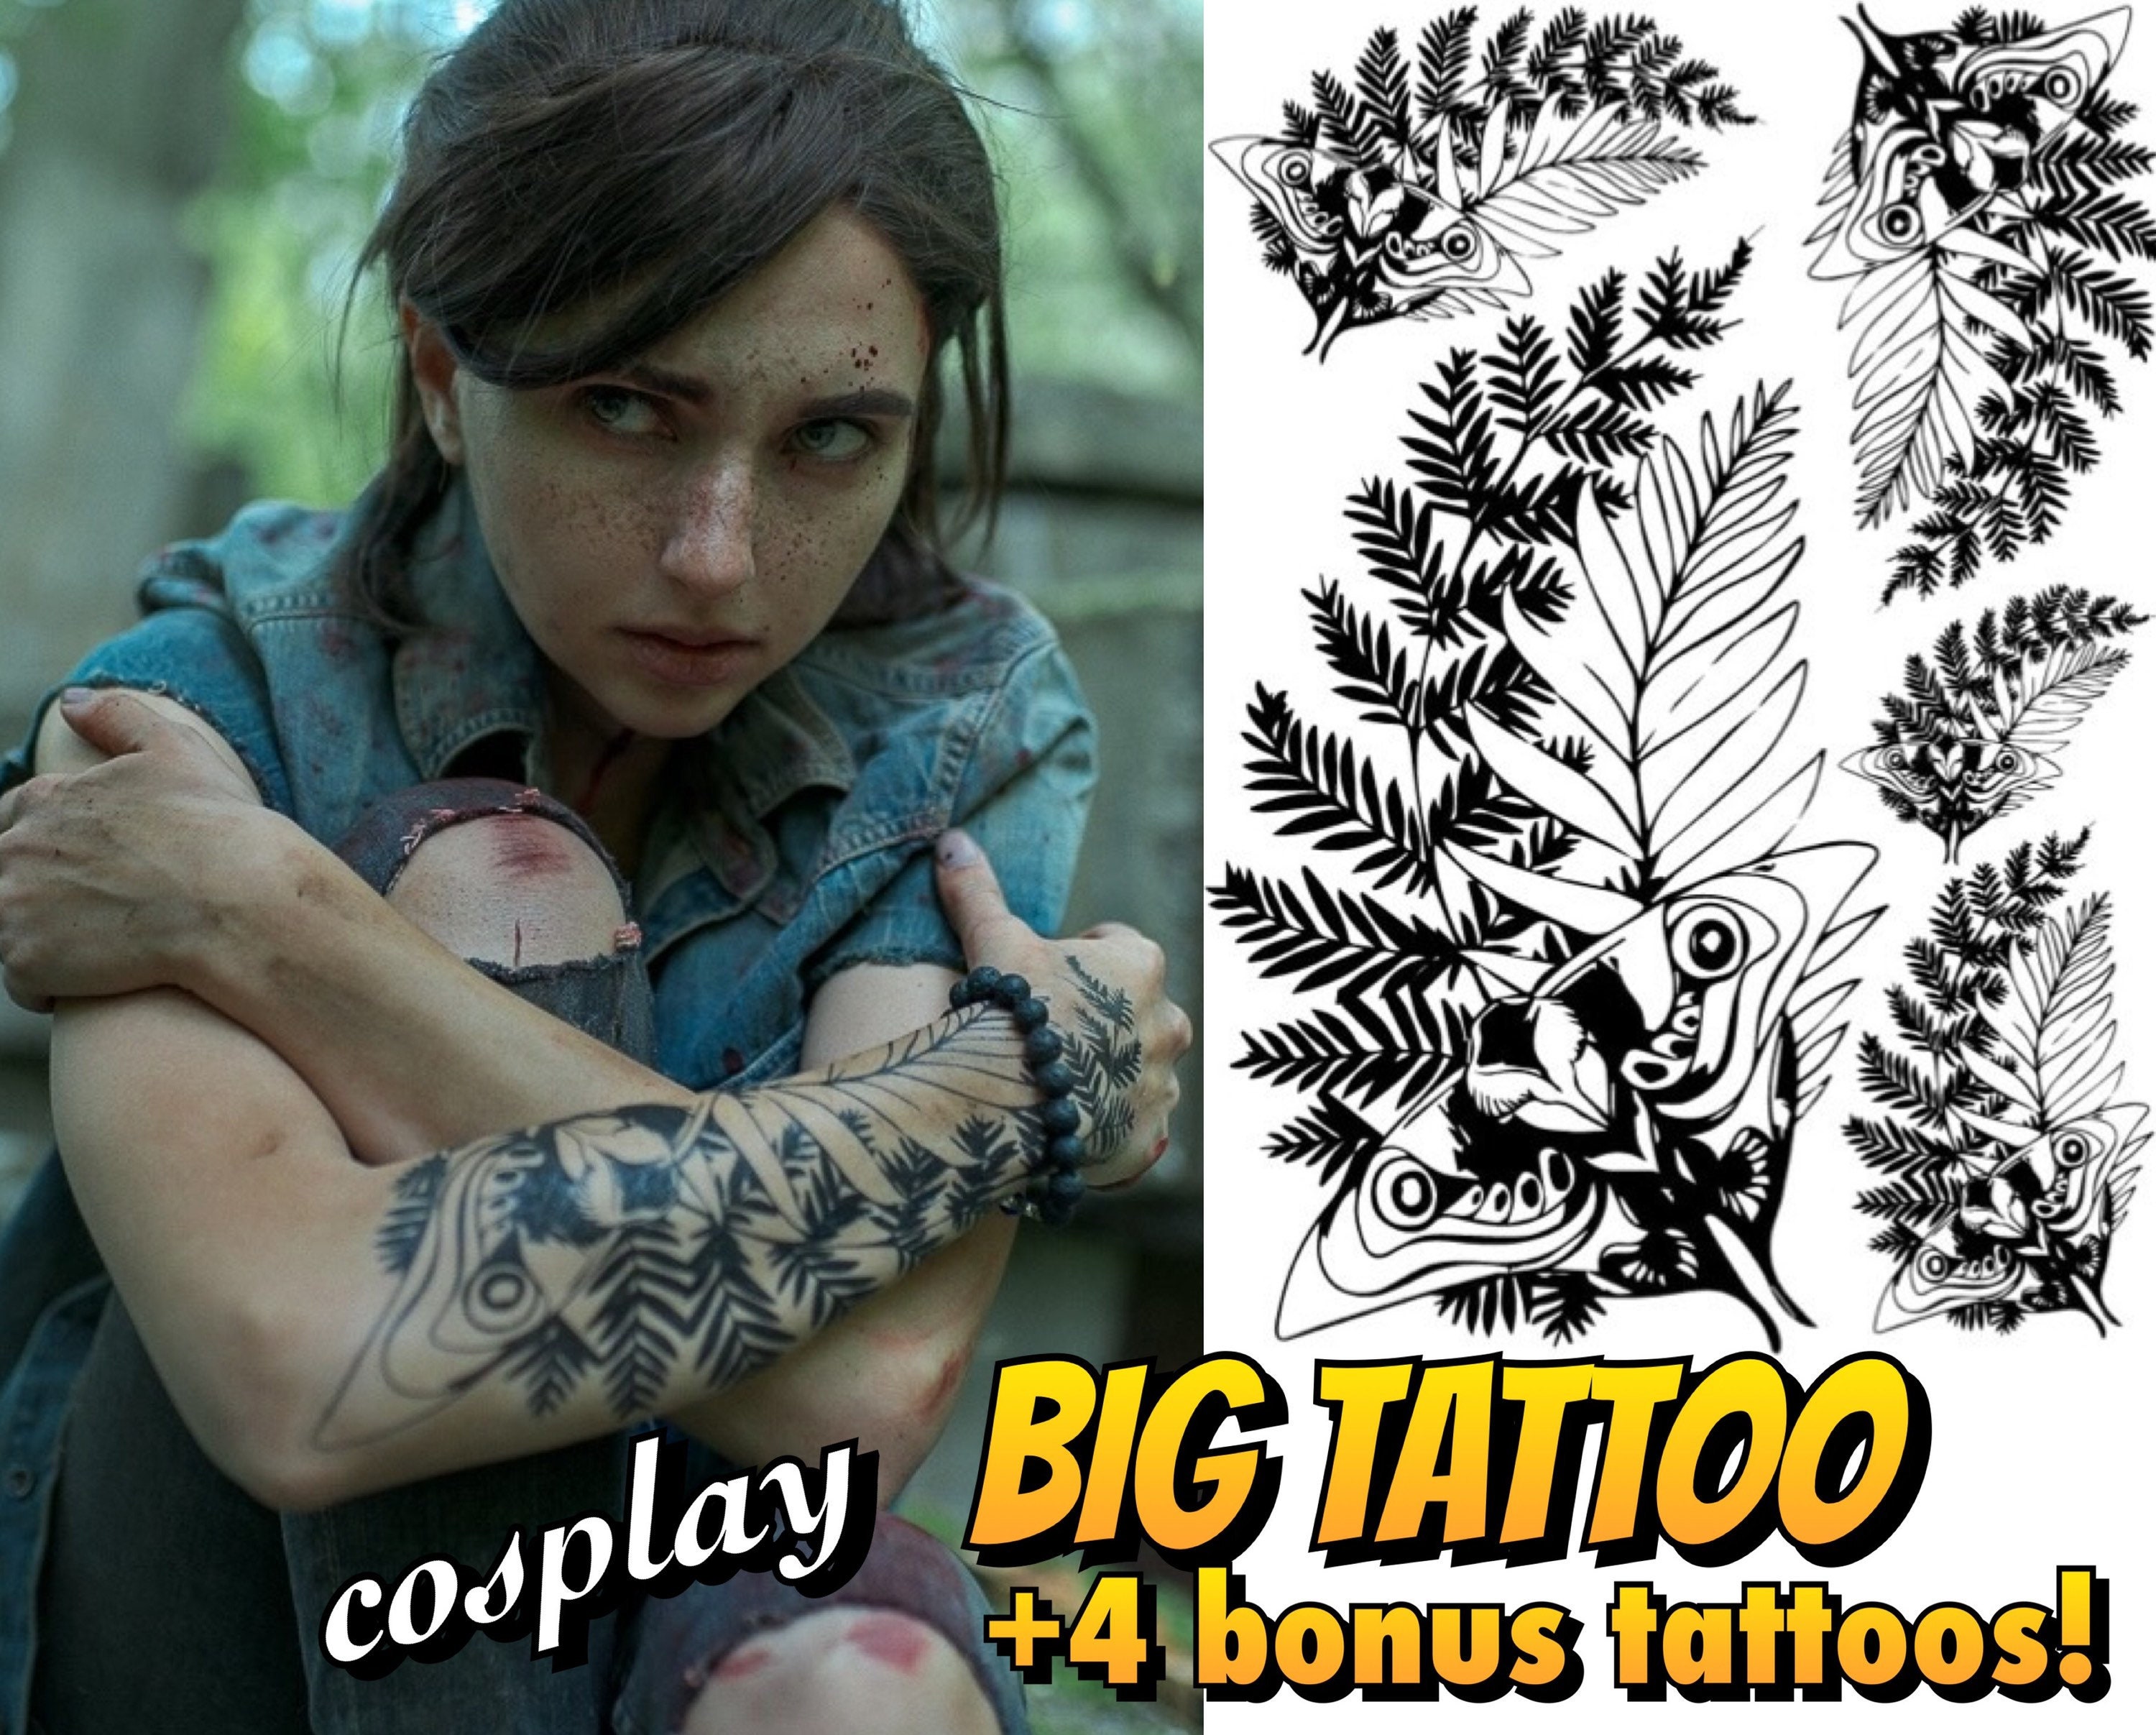 Ellie's Tattoo in The Last of Us - wide 8